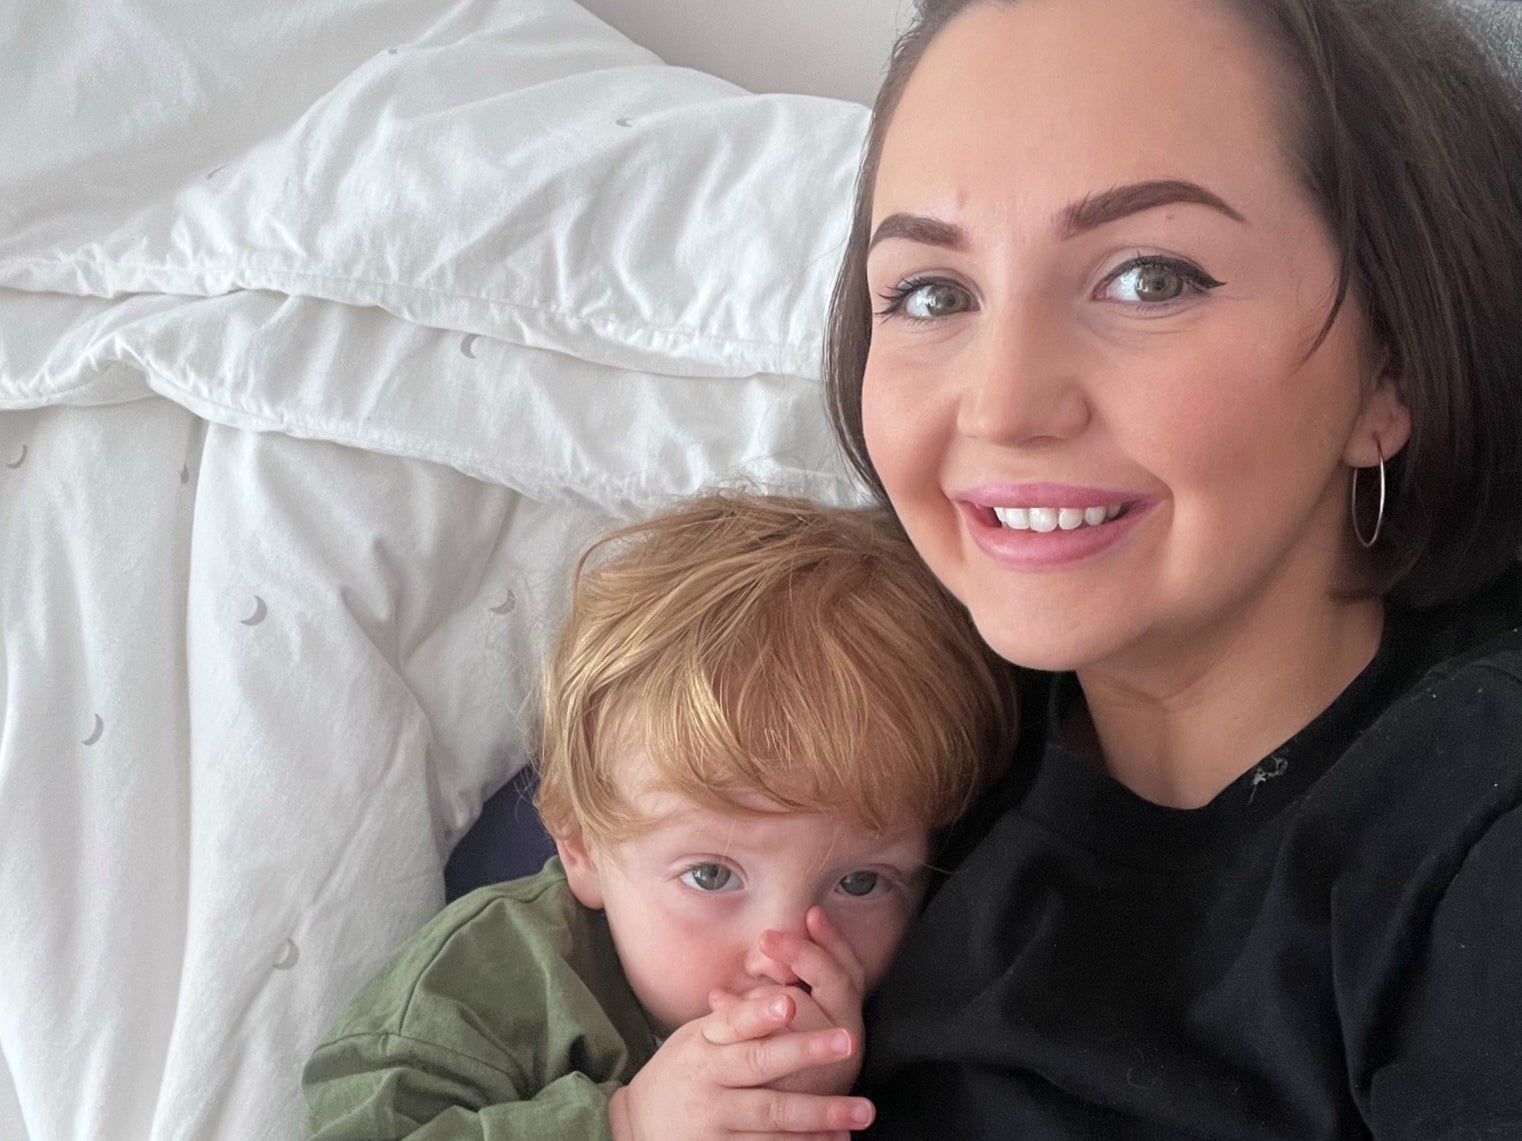 Sarah feels ‘lucky and fortunate’ to be alive after she was diagnosed with breast cancer during her pregnancy